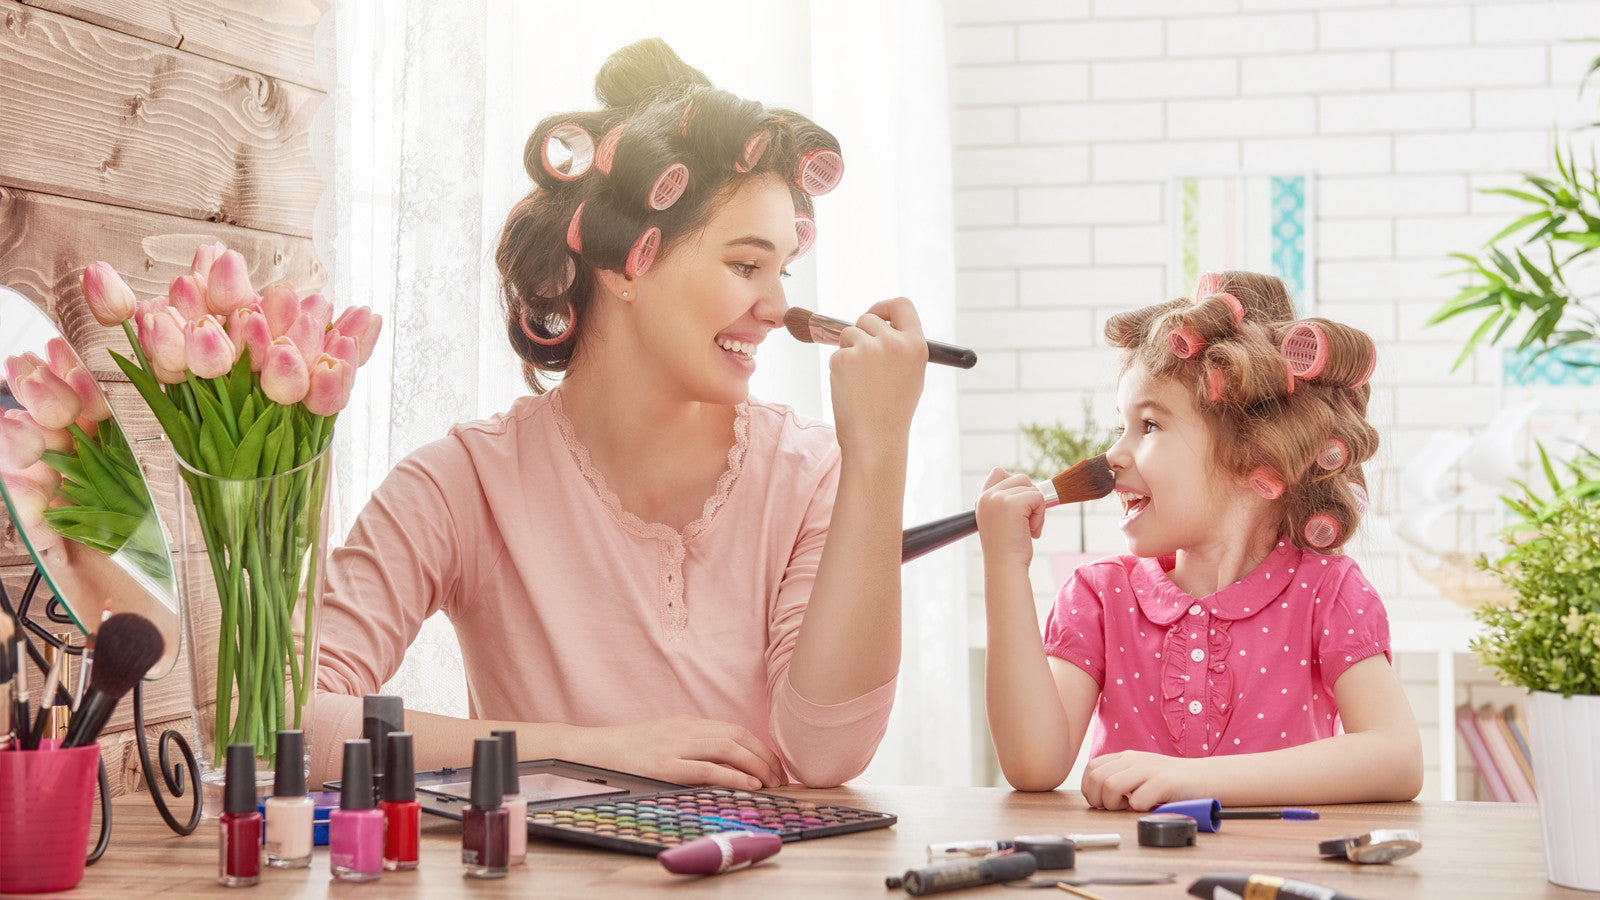 Mother and daughter's adorable makeup